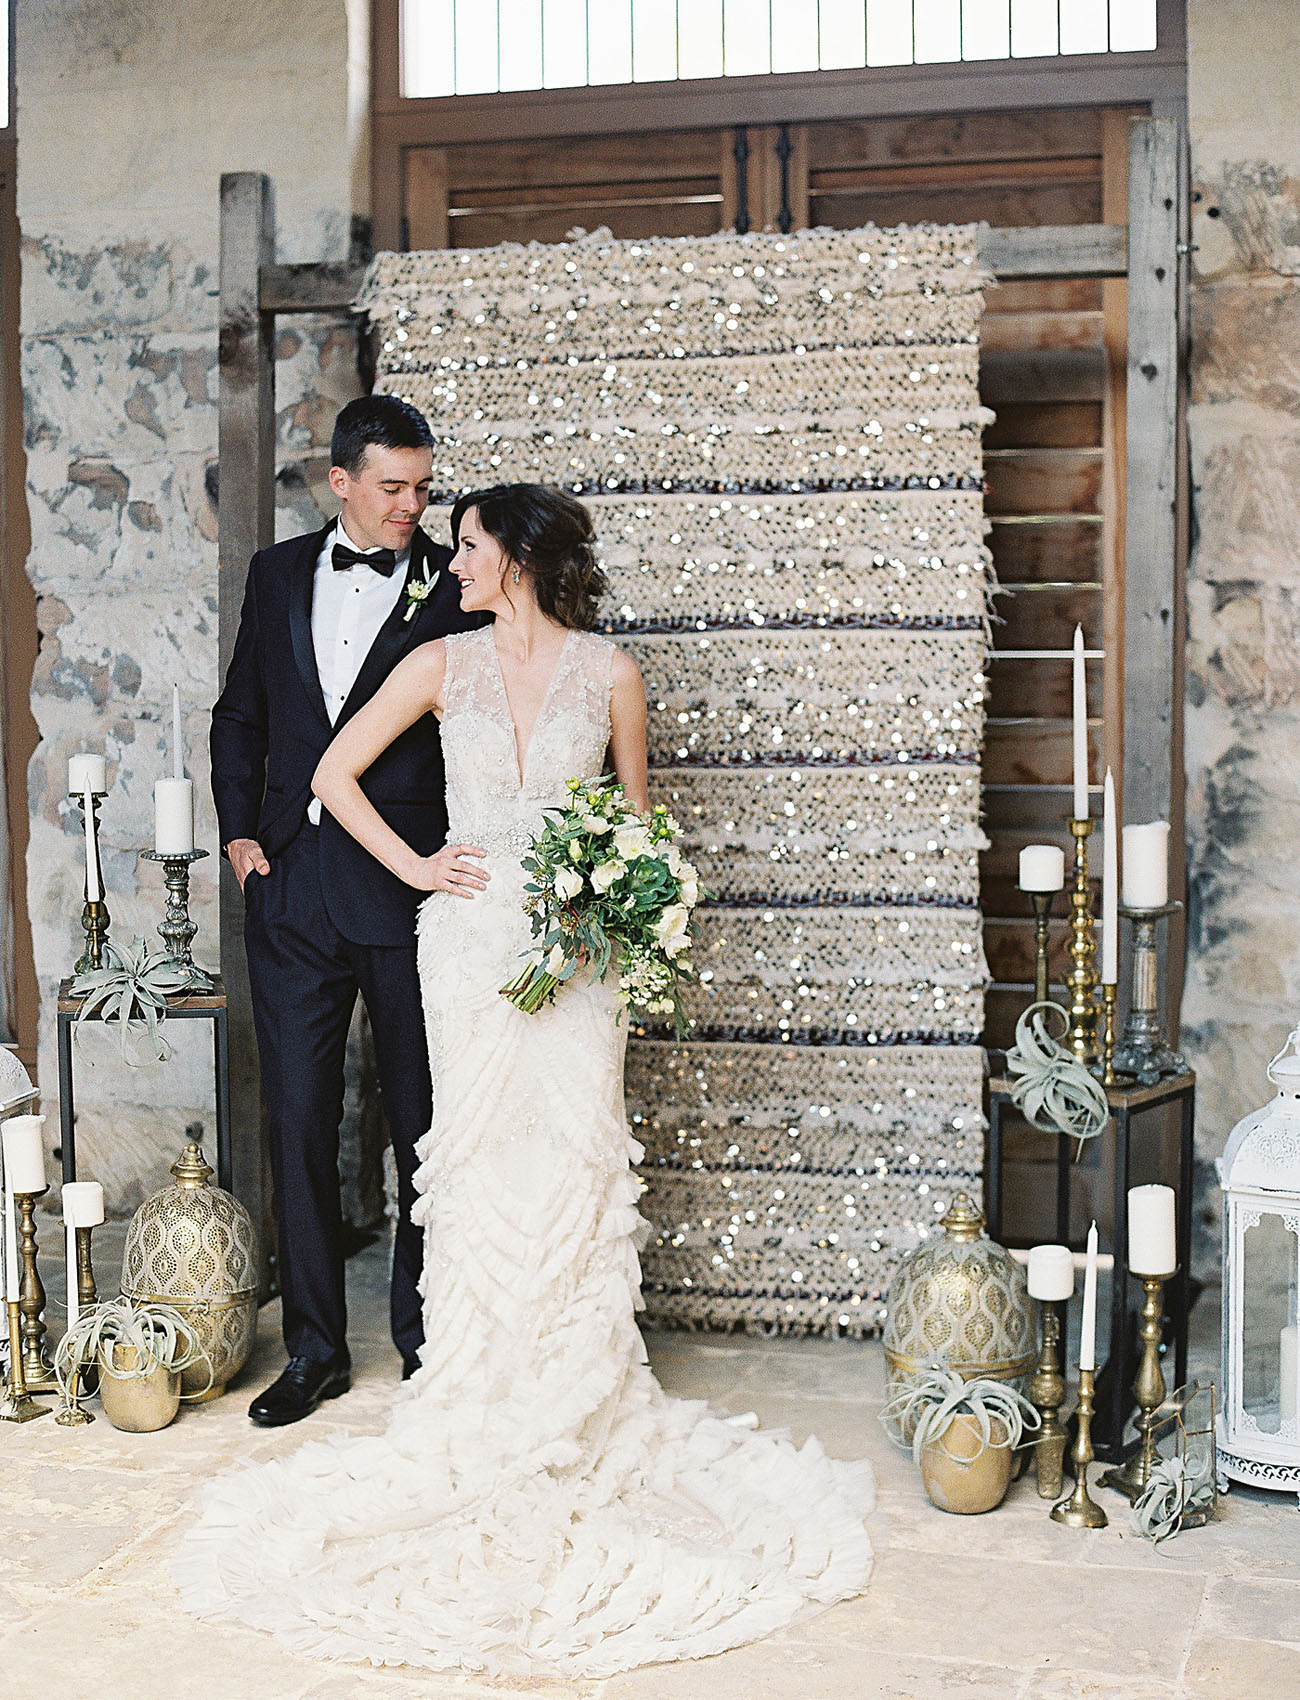 This glam wedding took place in Texas but you'll feel Morocco in every detail